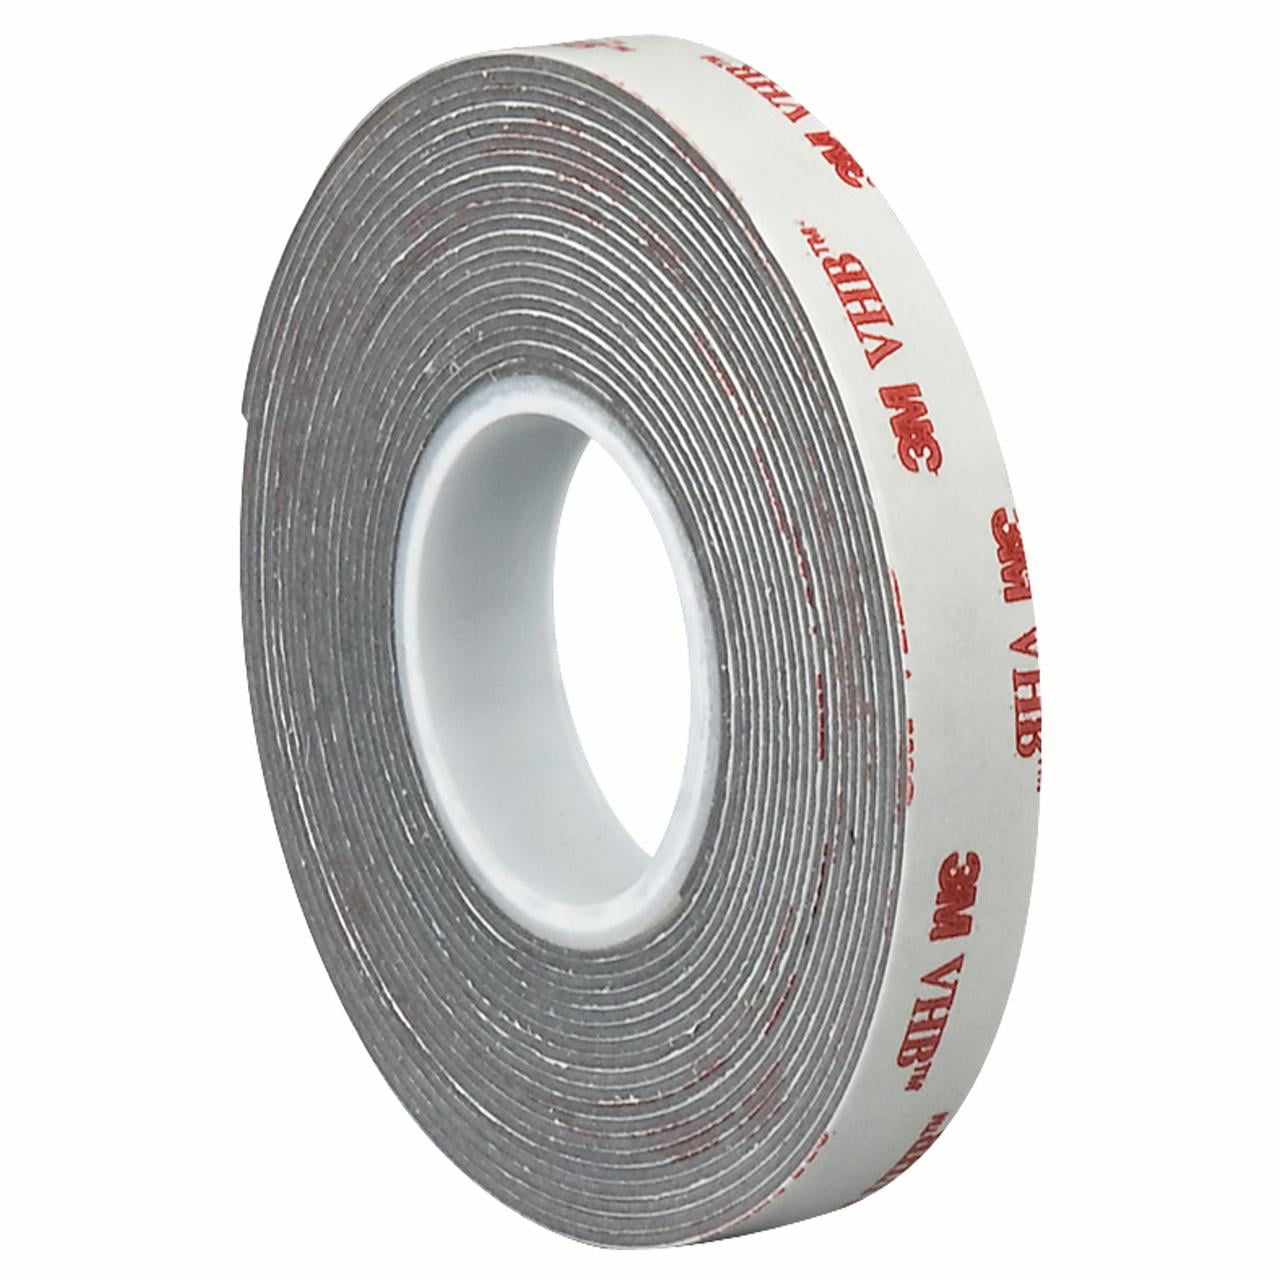 494112r 0.5 In. X 5 Yards Gray 3m 4941 Tape